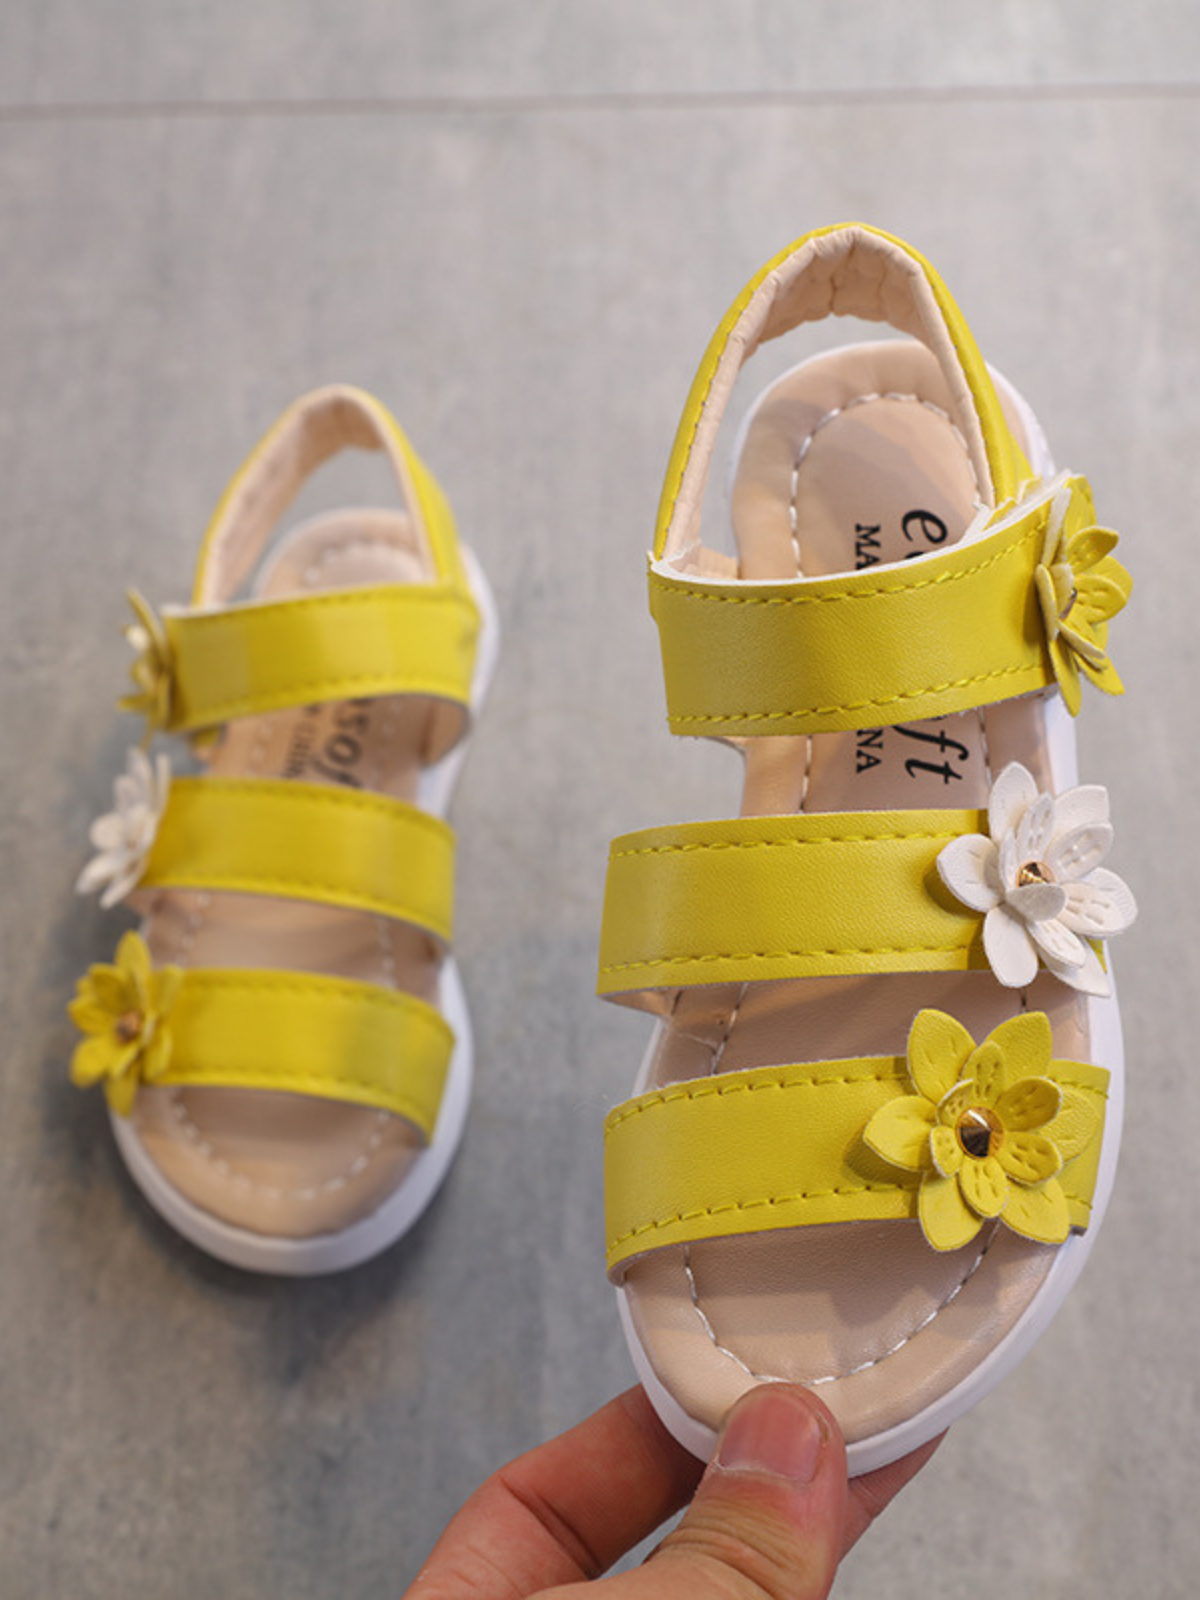 Toddler and Little Girls Shoes | Cute Flower Sandals | Mia Belle Girls